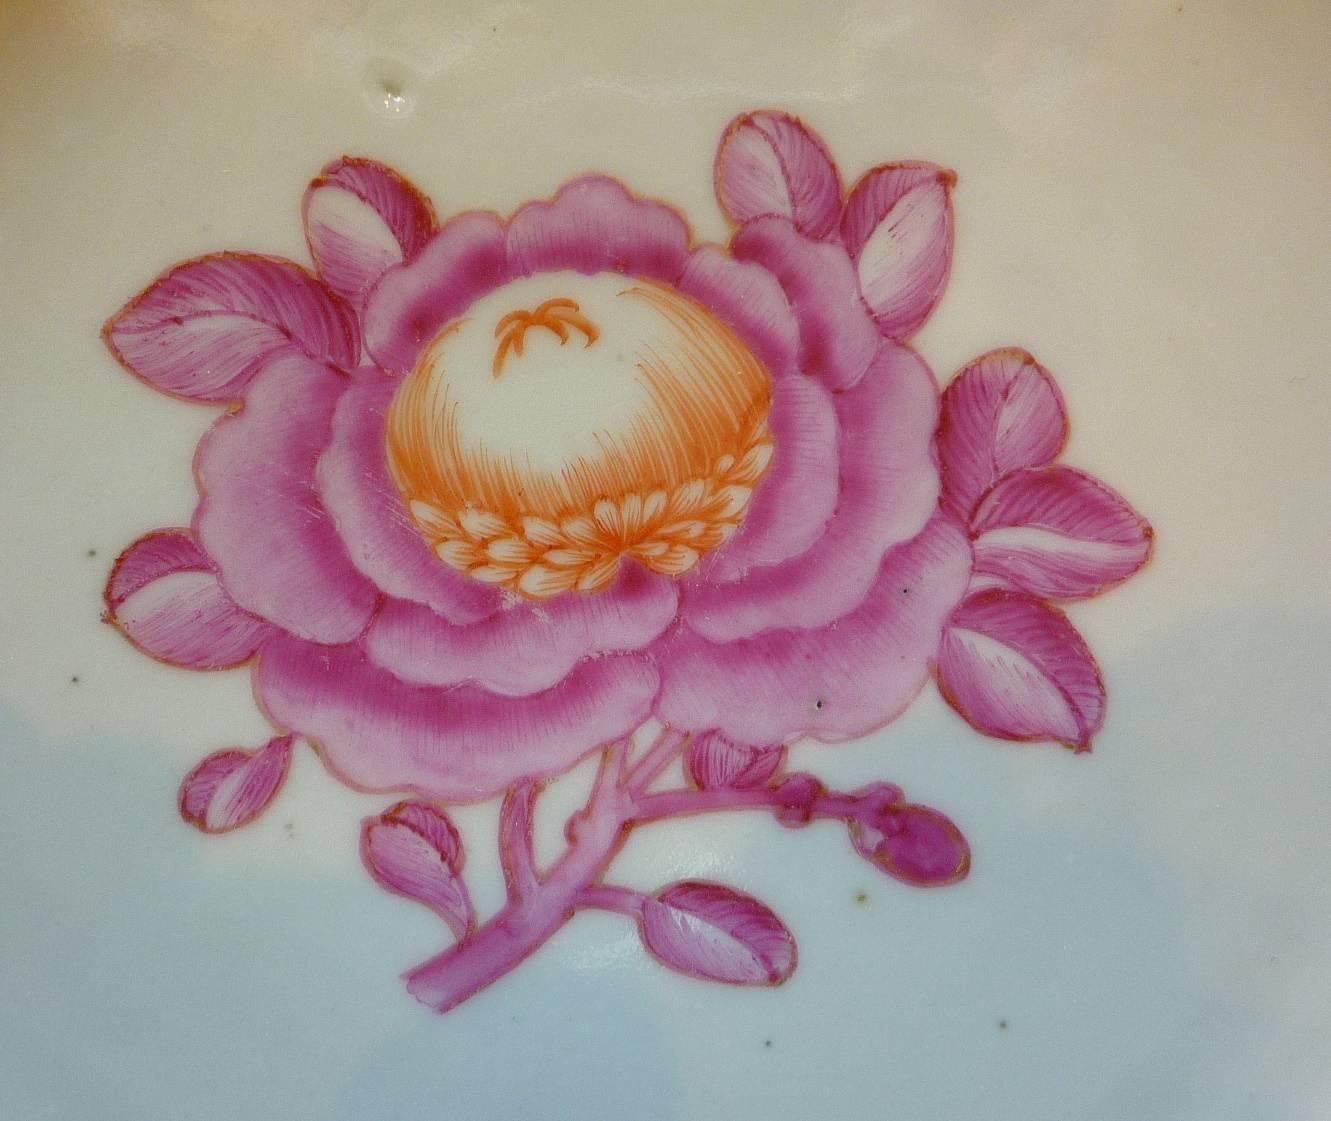 Mid-18th Century Part of a Table Service in Chinese Porcelain, John Adams Model, circa 1770